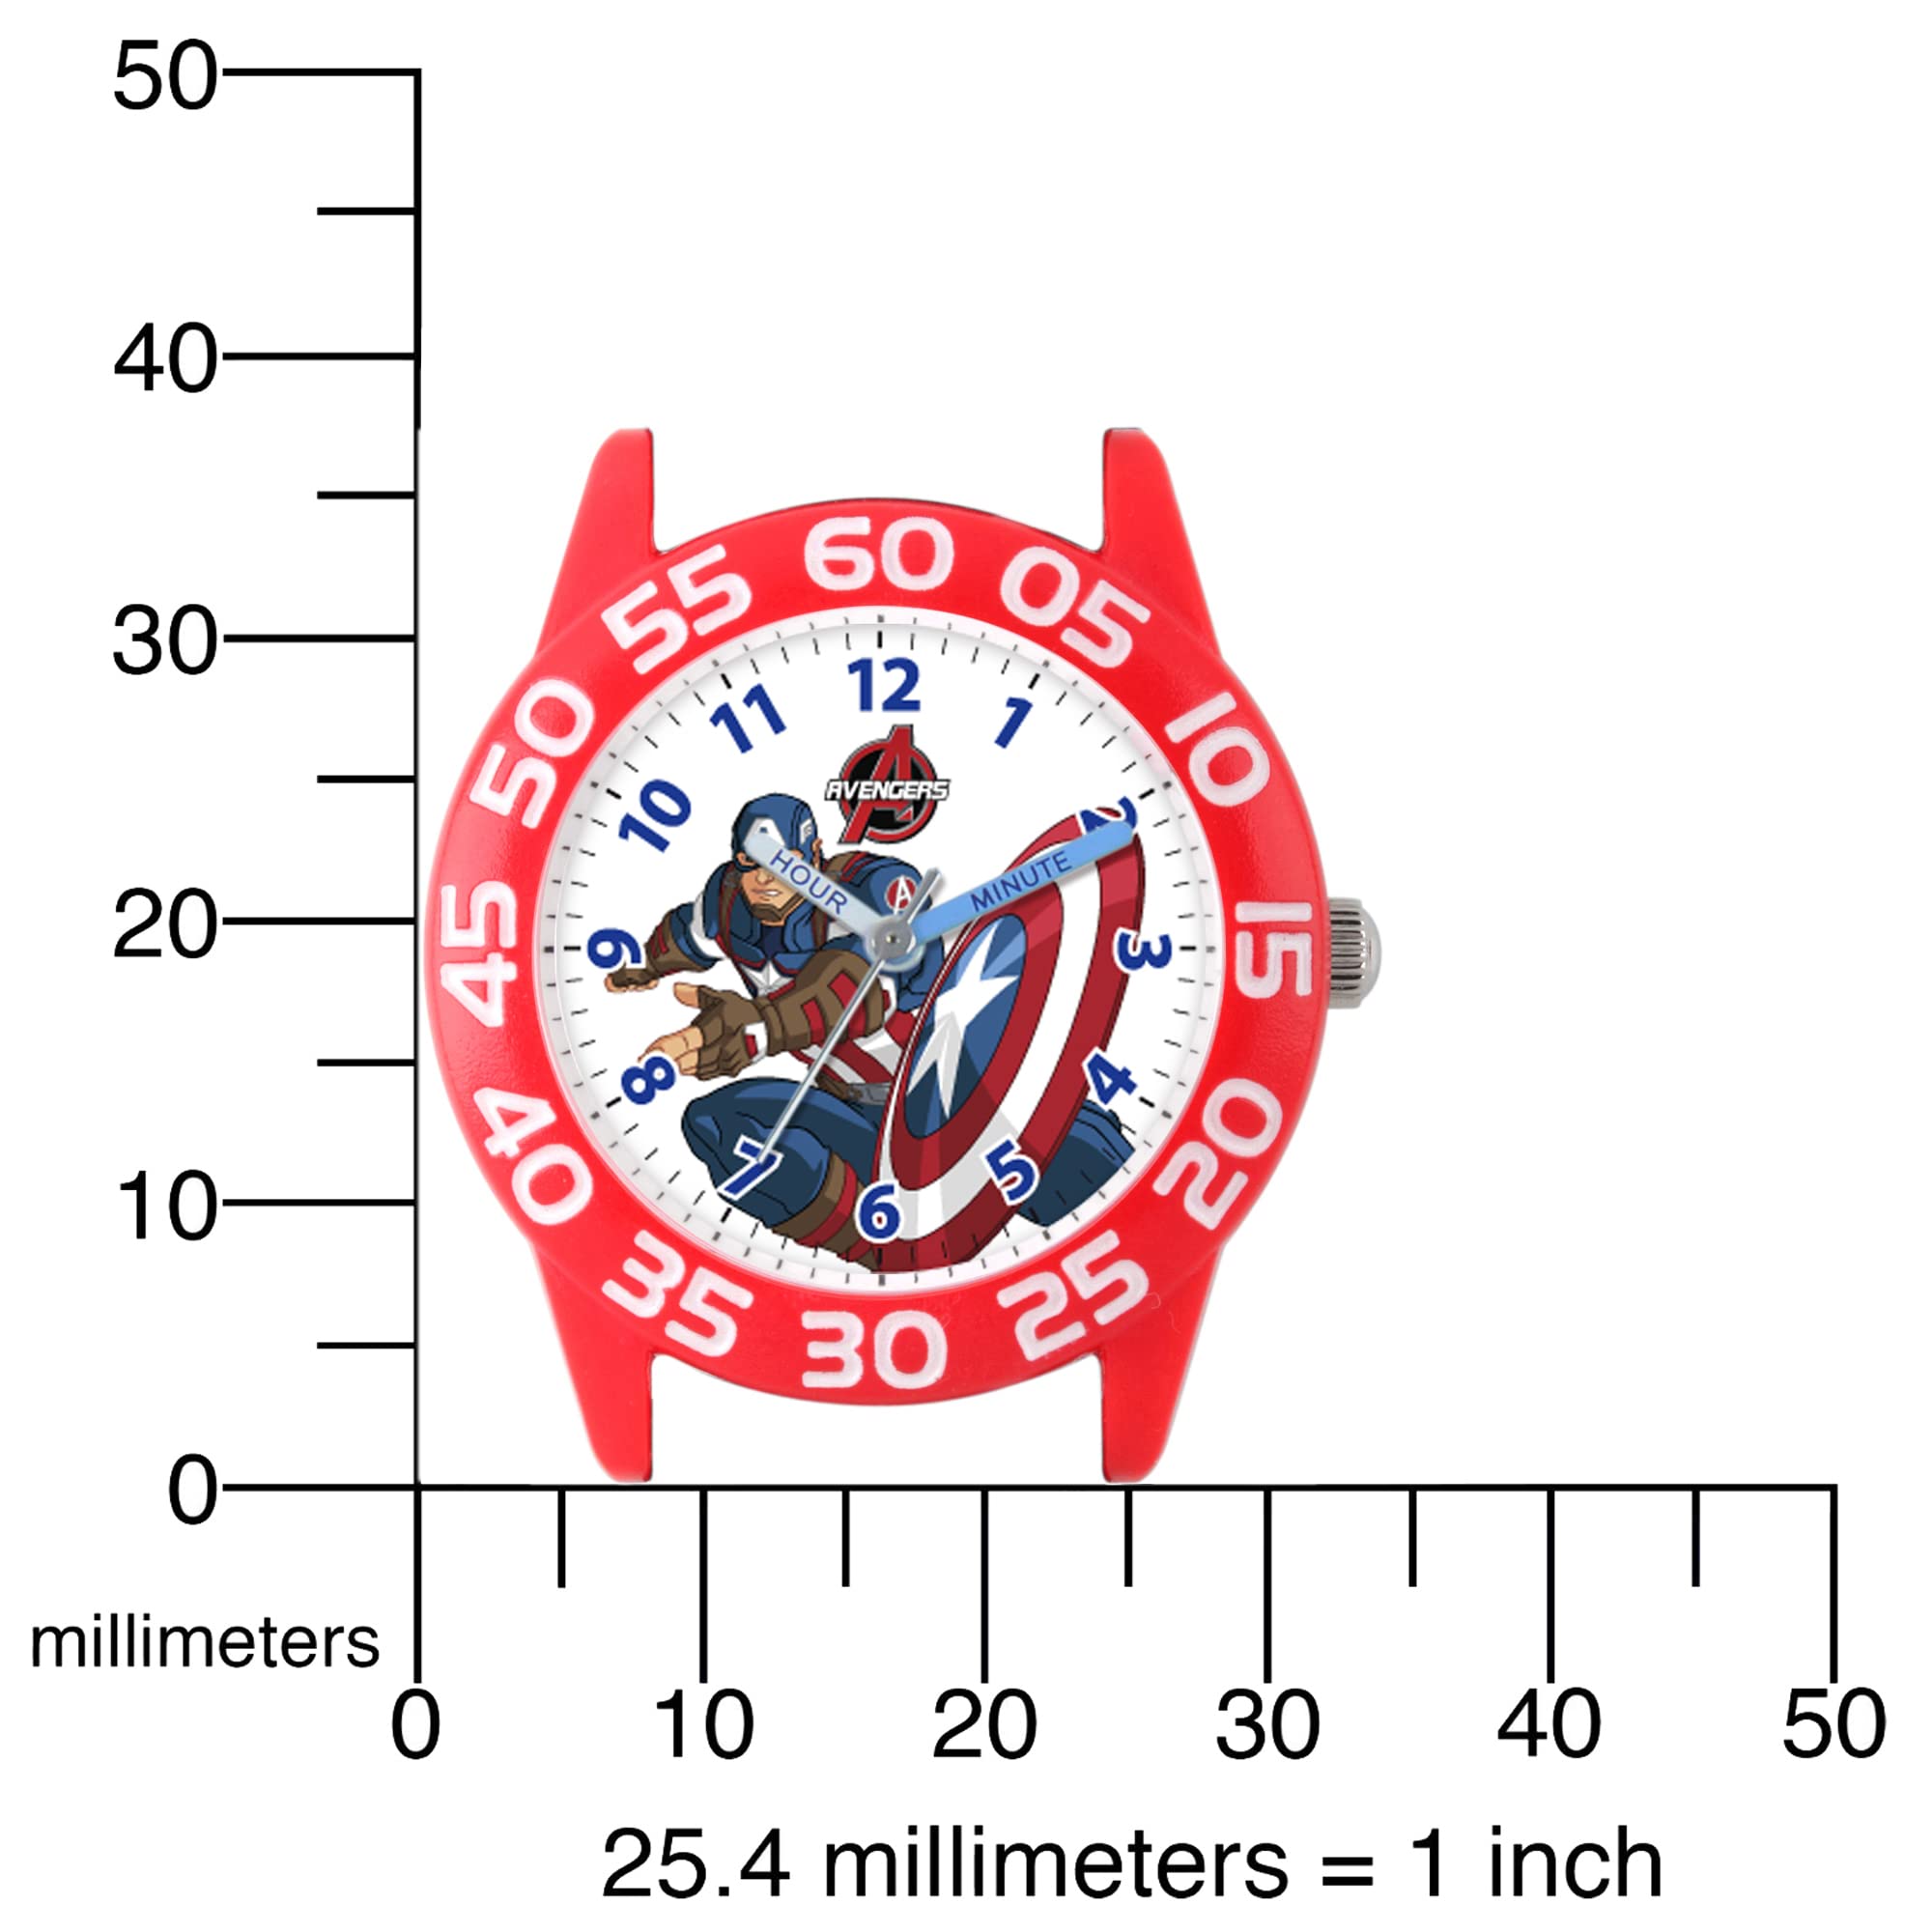 Accutime Kids Marvel Avengers Captain America Spiderman Guardians of The Galaxy Analog Quartz Superhero Time Teacher Watch for Boys, Girls, Toddlers with Hour Minute Markers to Learn How to Read Time